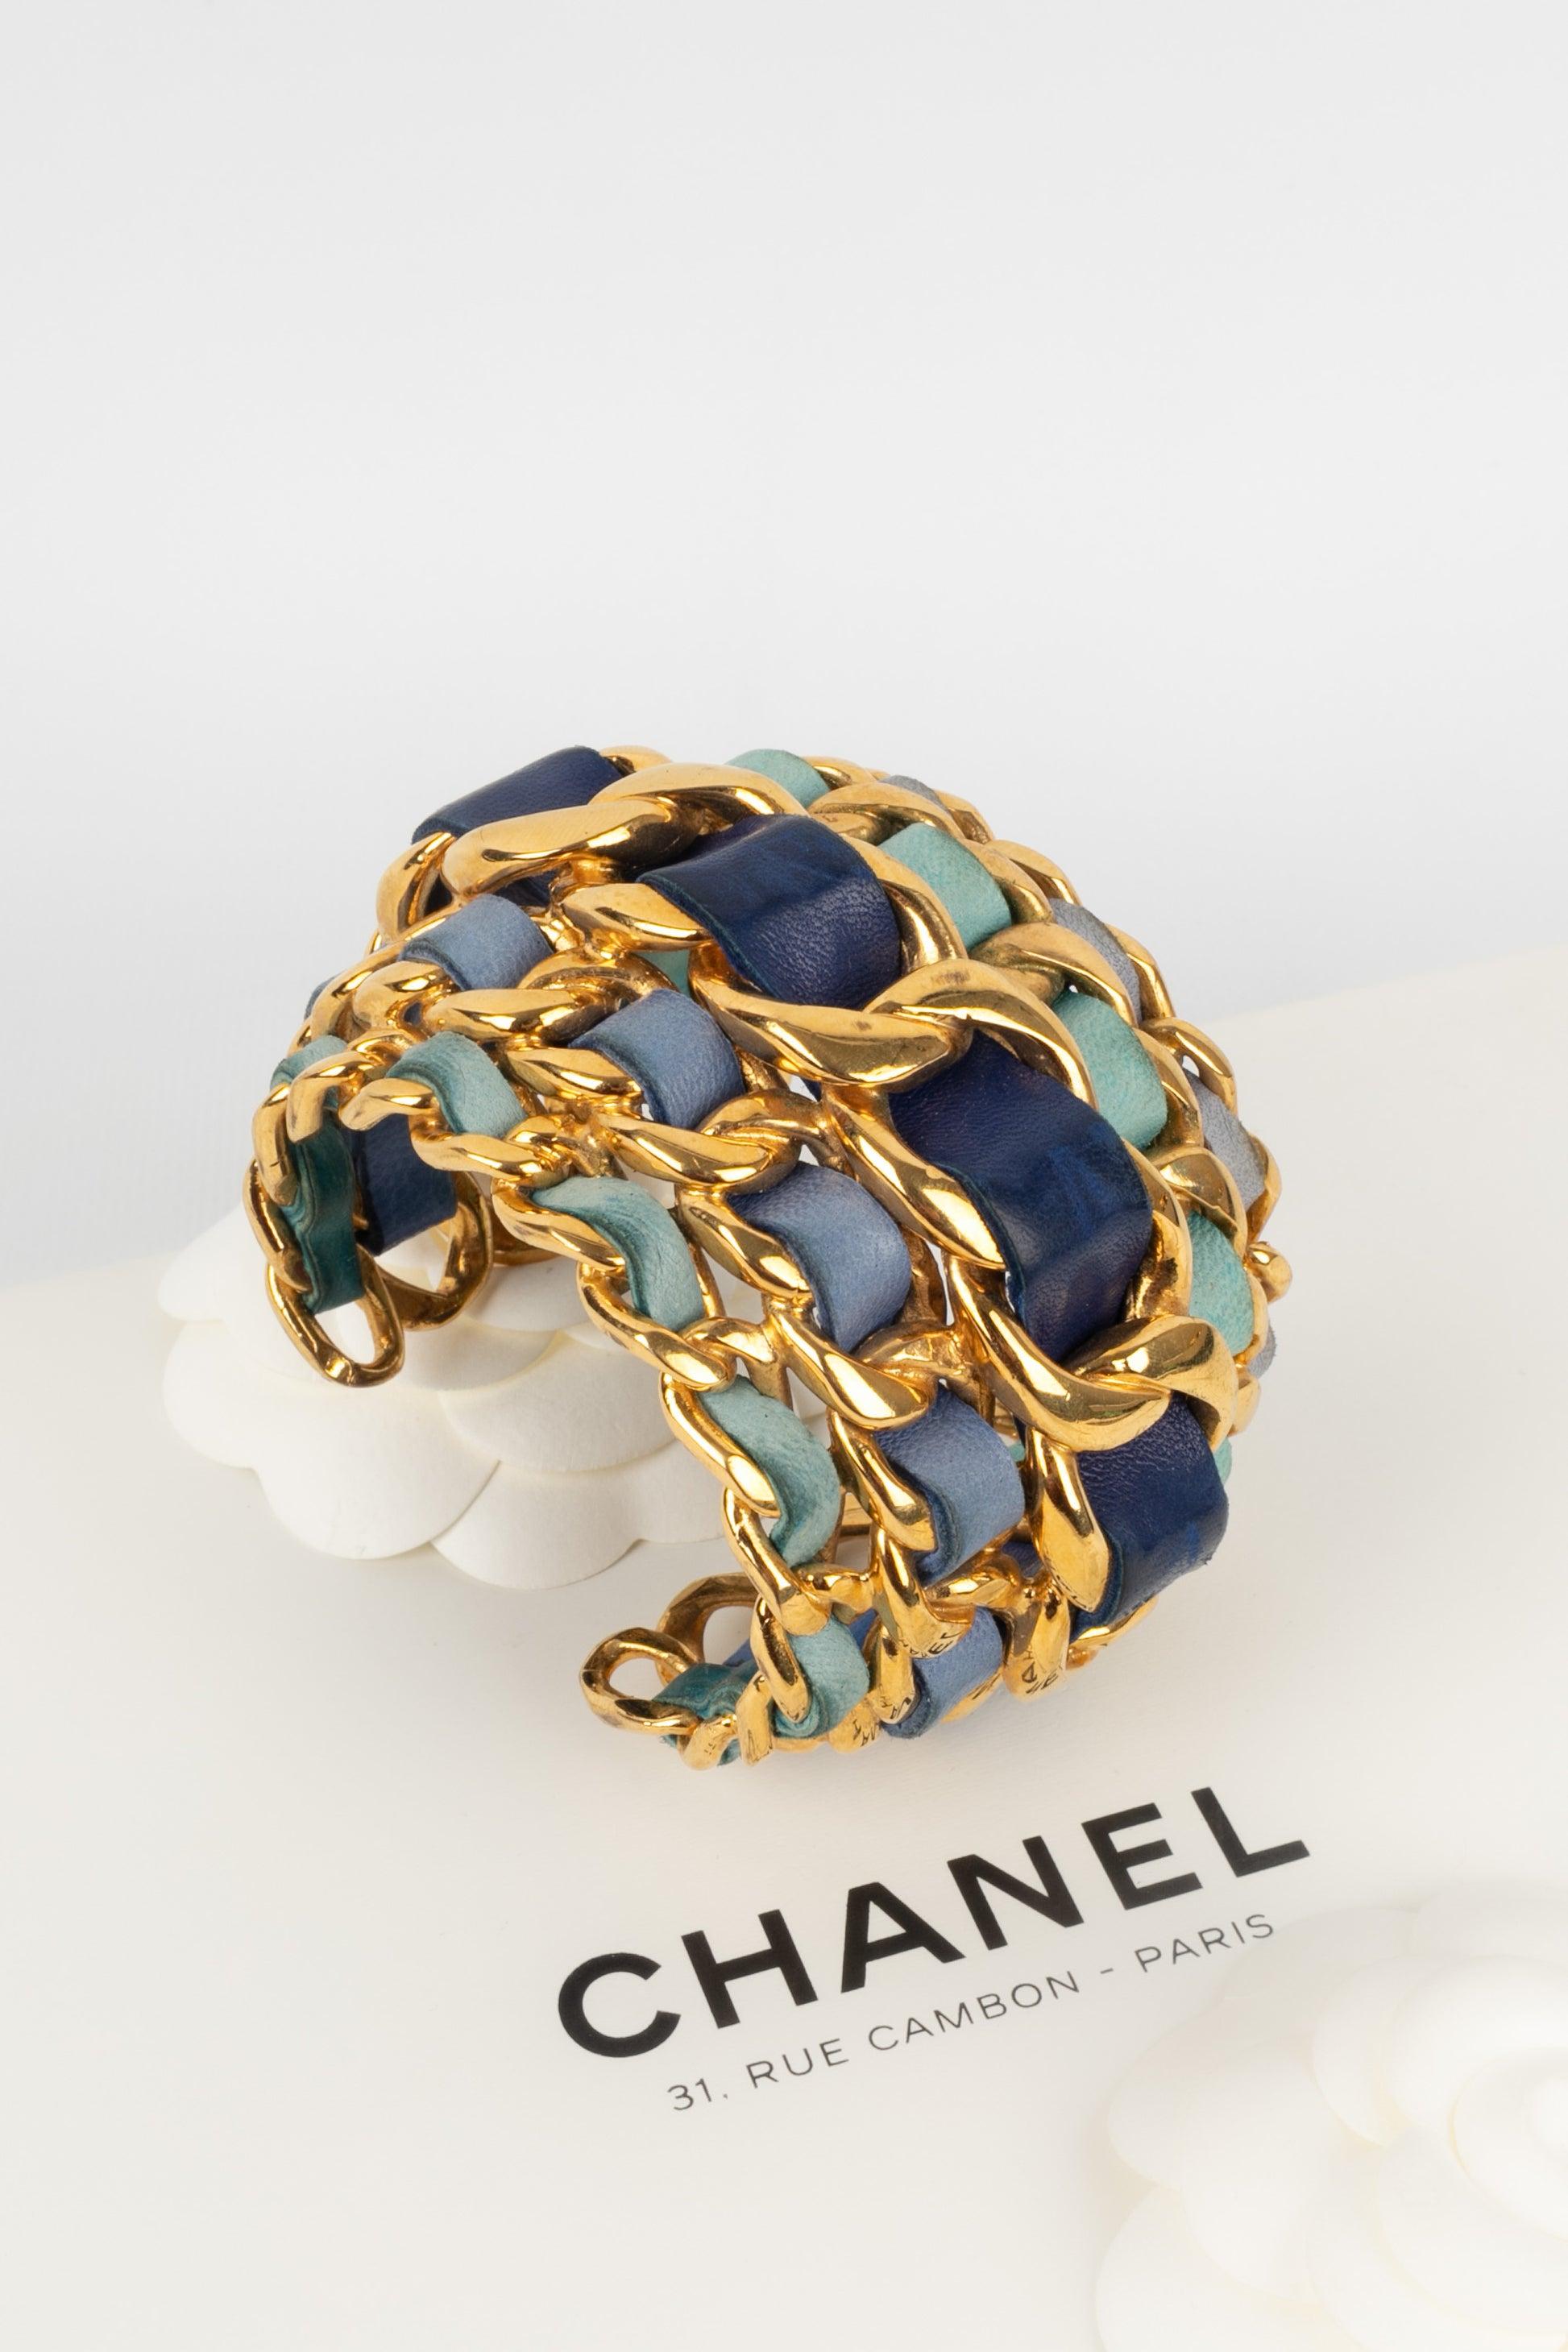 Chanel Cuff Bracelet in Golden Metal Interlaced with Blue Tone Leather, 1991 For Sale 4